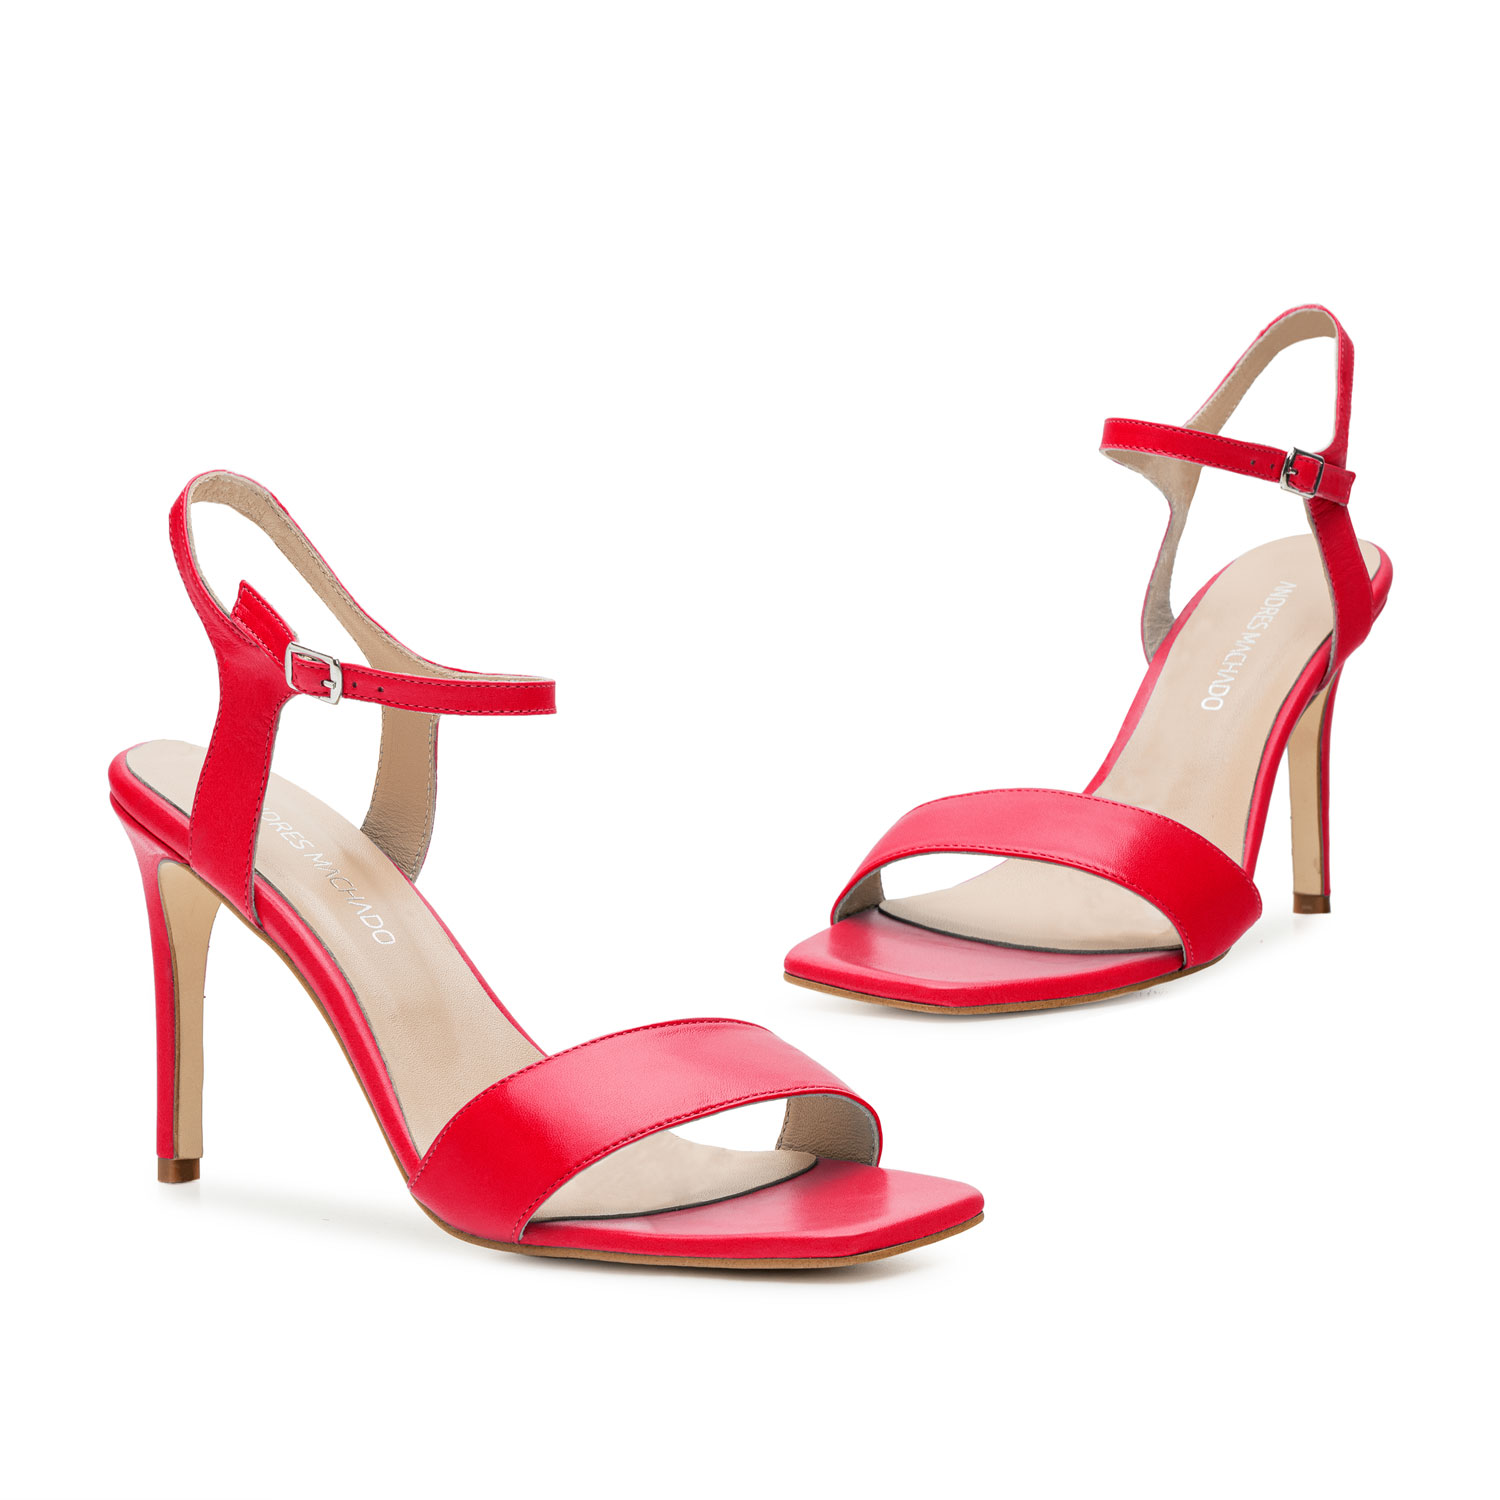 Ankle Stiletto Sandals in Fuchsia Leather 